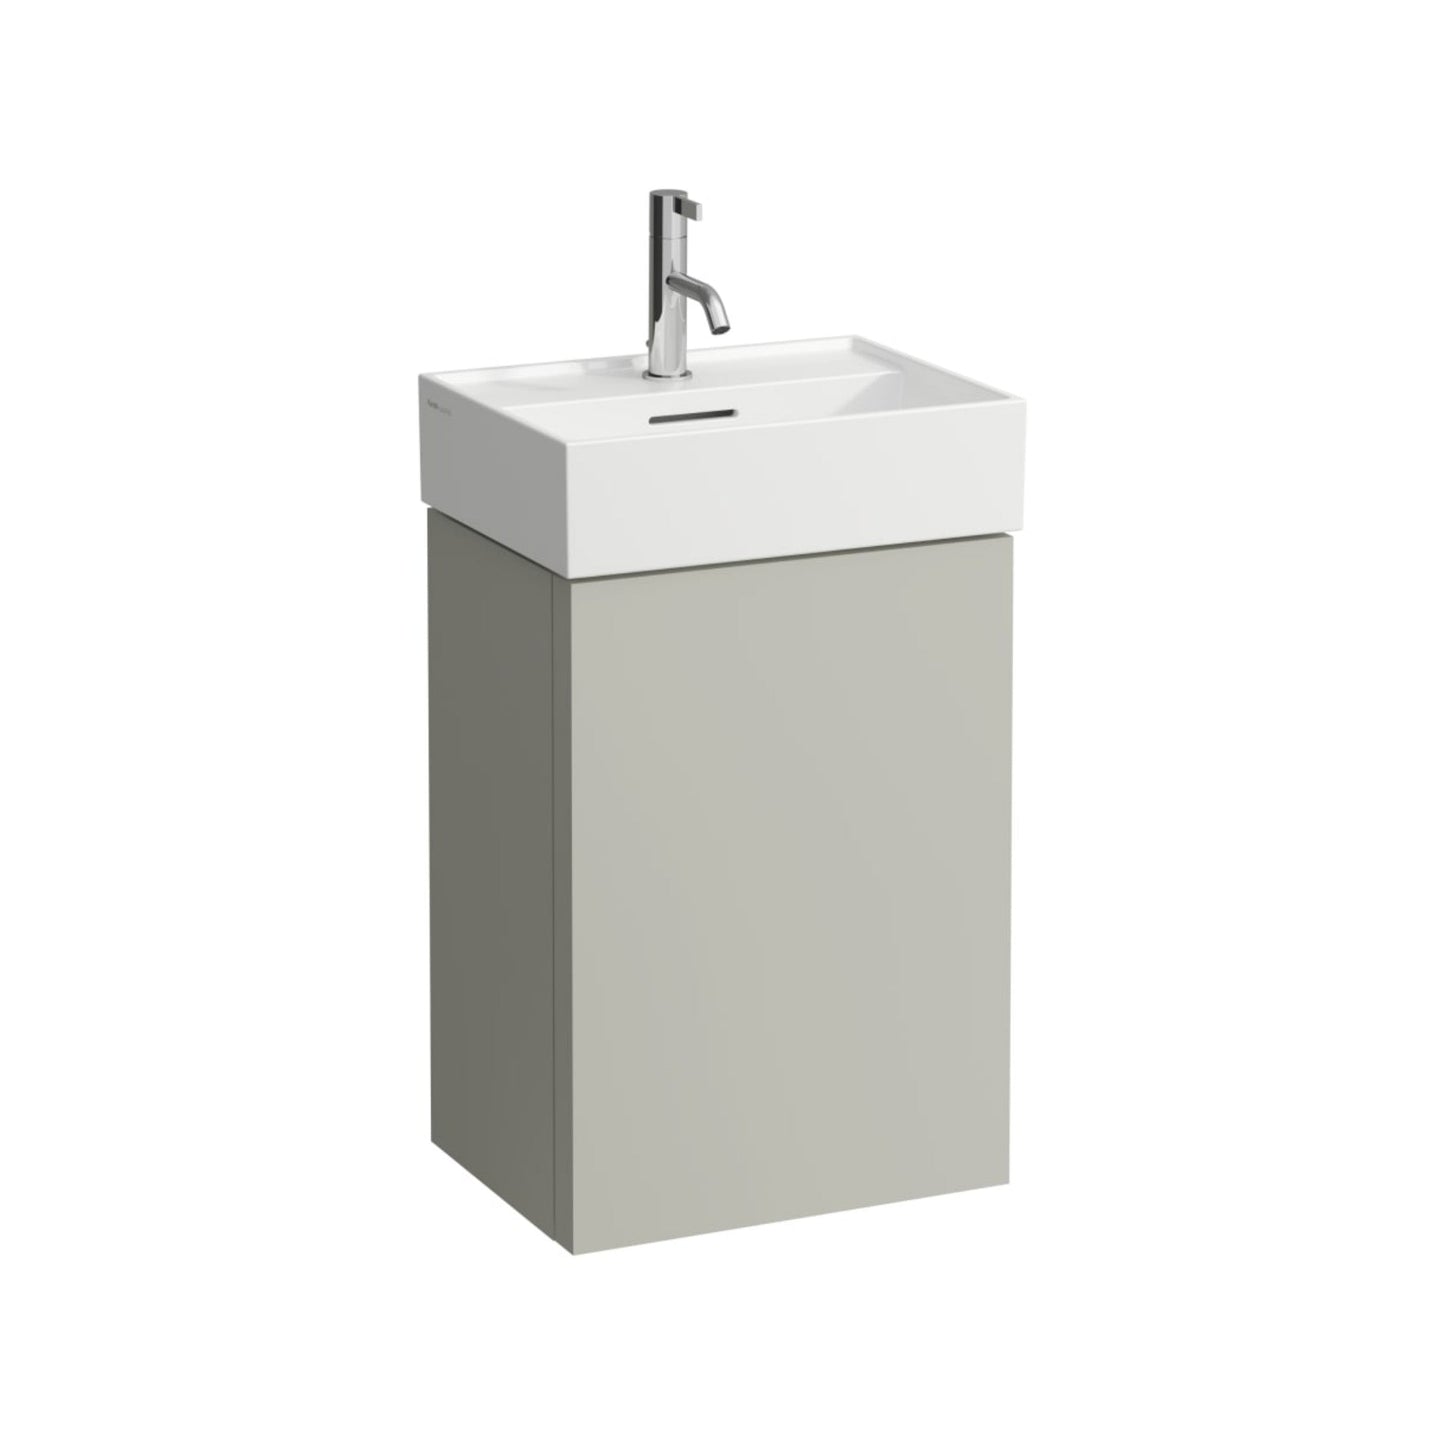 Laufen Kartell 18" x 13" Matte White Wall-Mounted Bathroom Sink With Faucet Hole